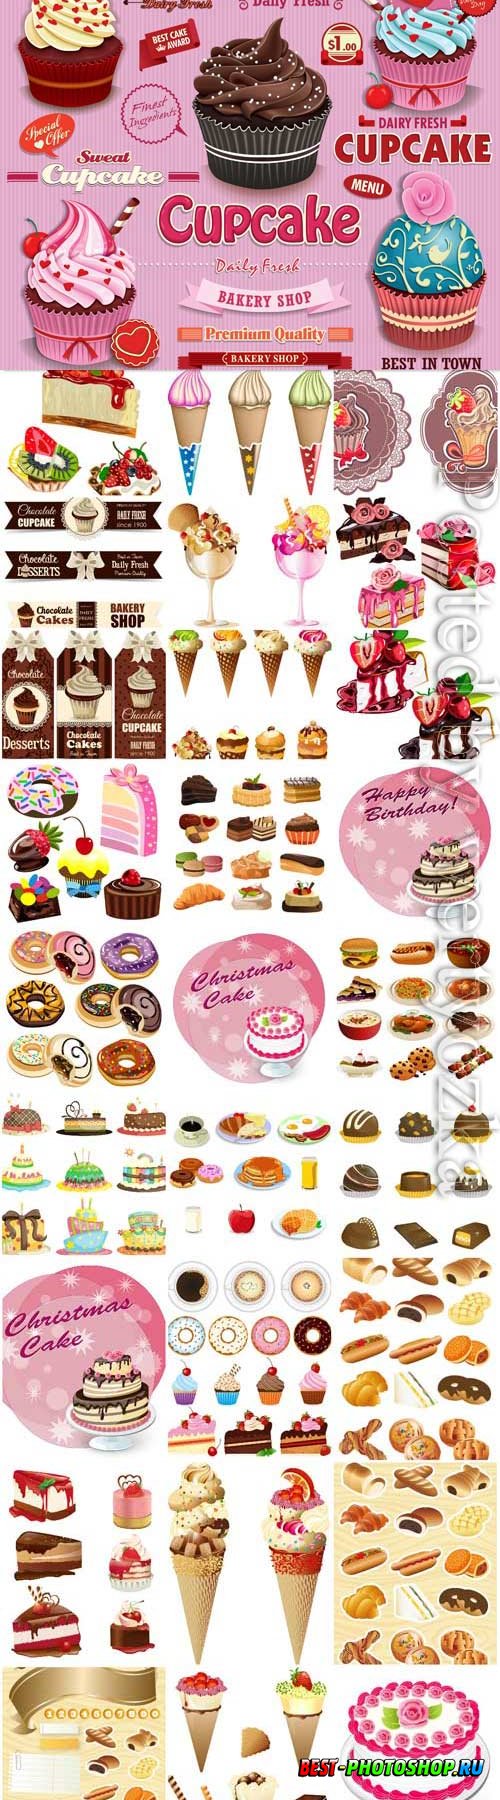 Desserts, ice cream cakes and various sweets in vector